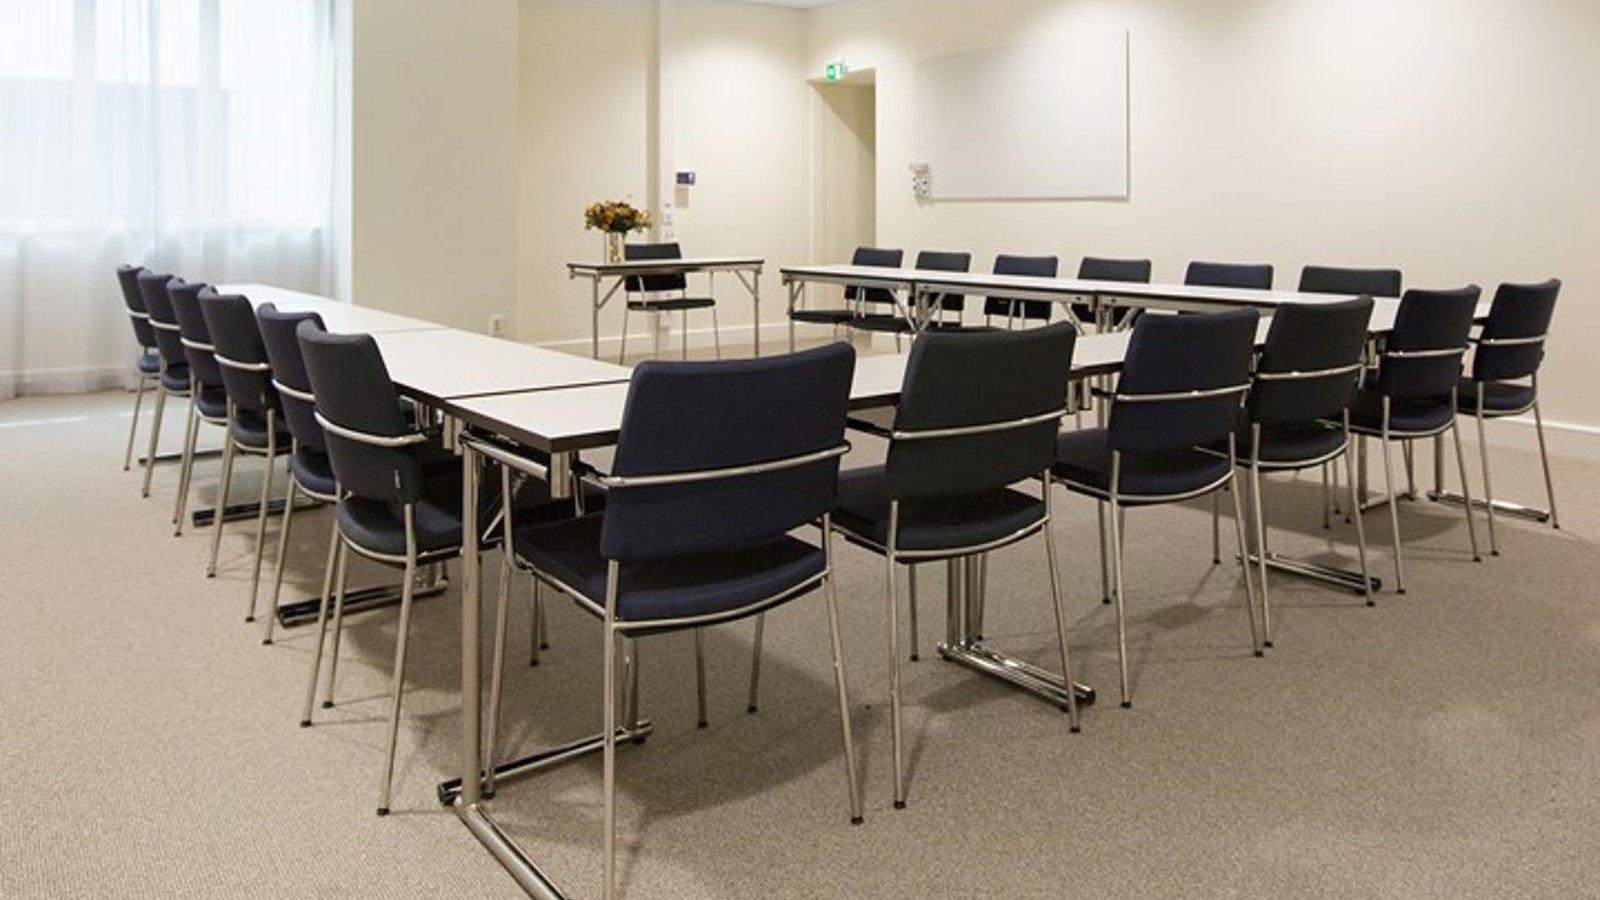 Bright conference room with u-shaped seating, white walls and black chairs